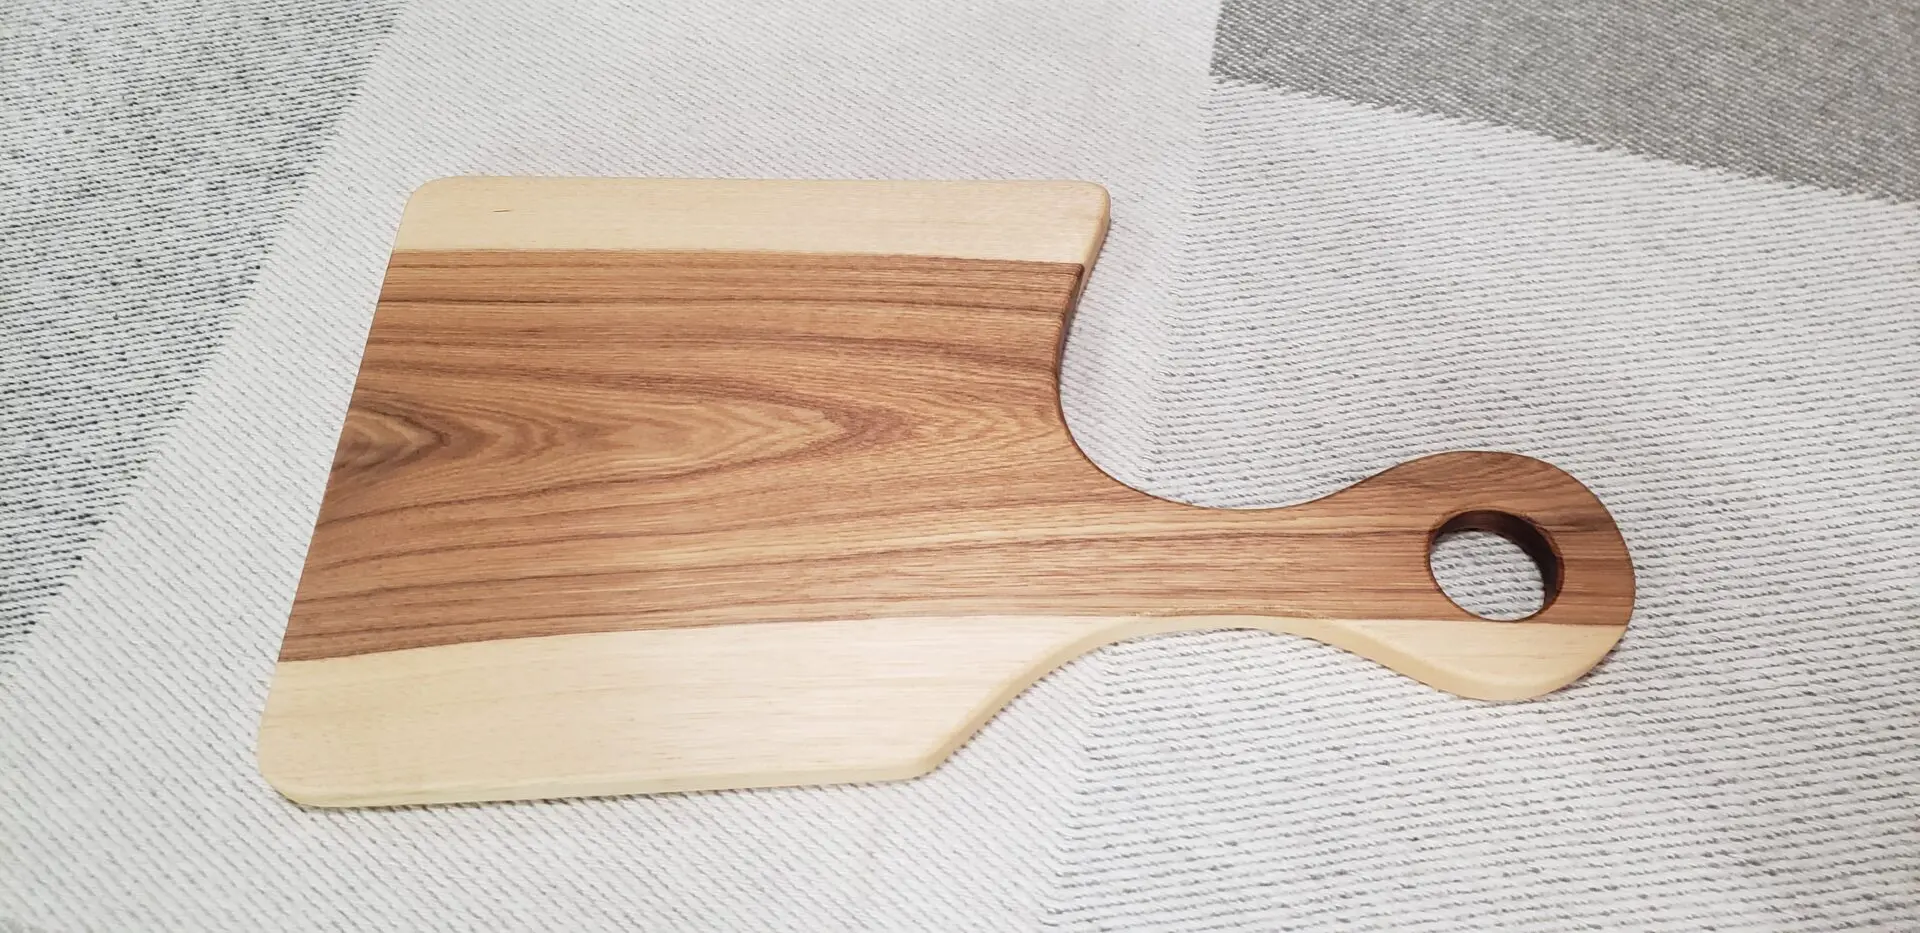 Hickory Charcuterie Board $60.00